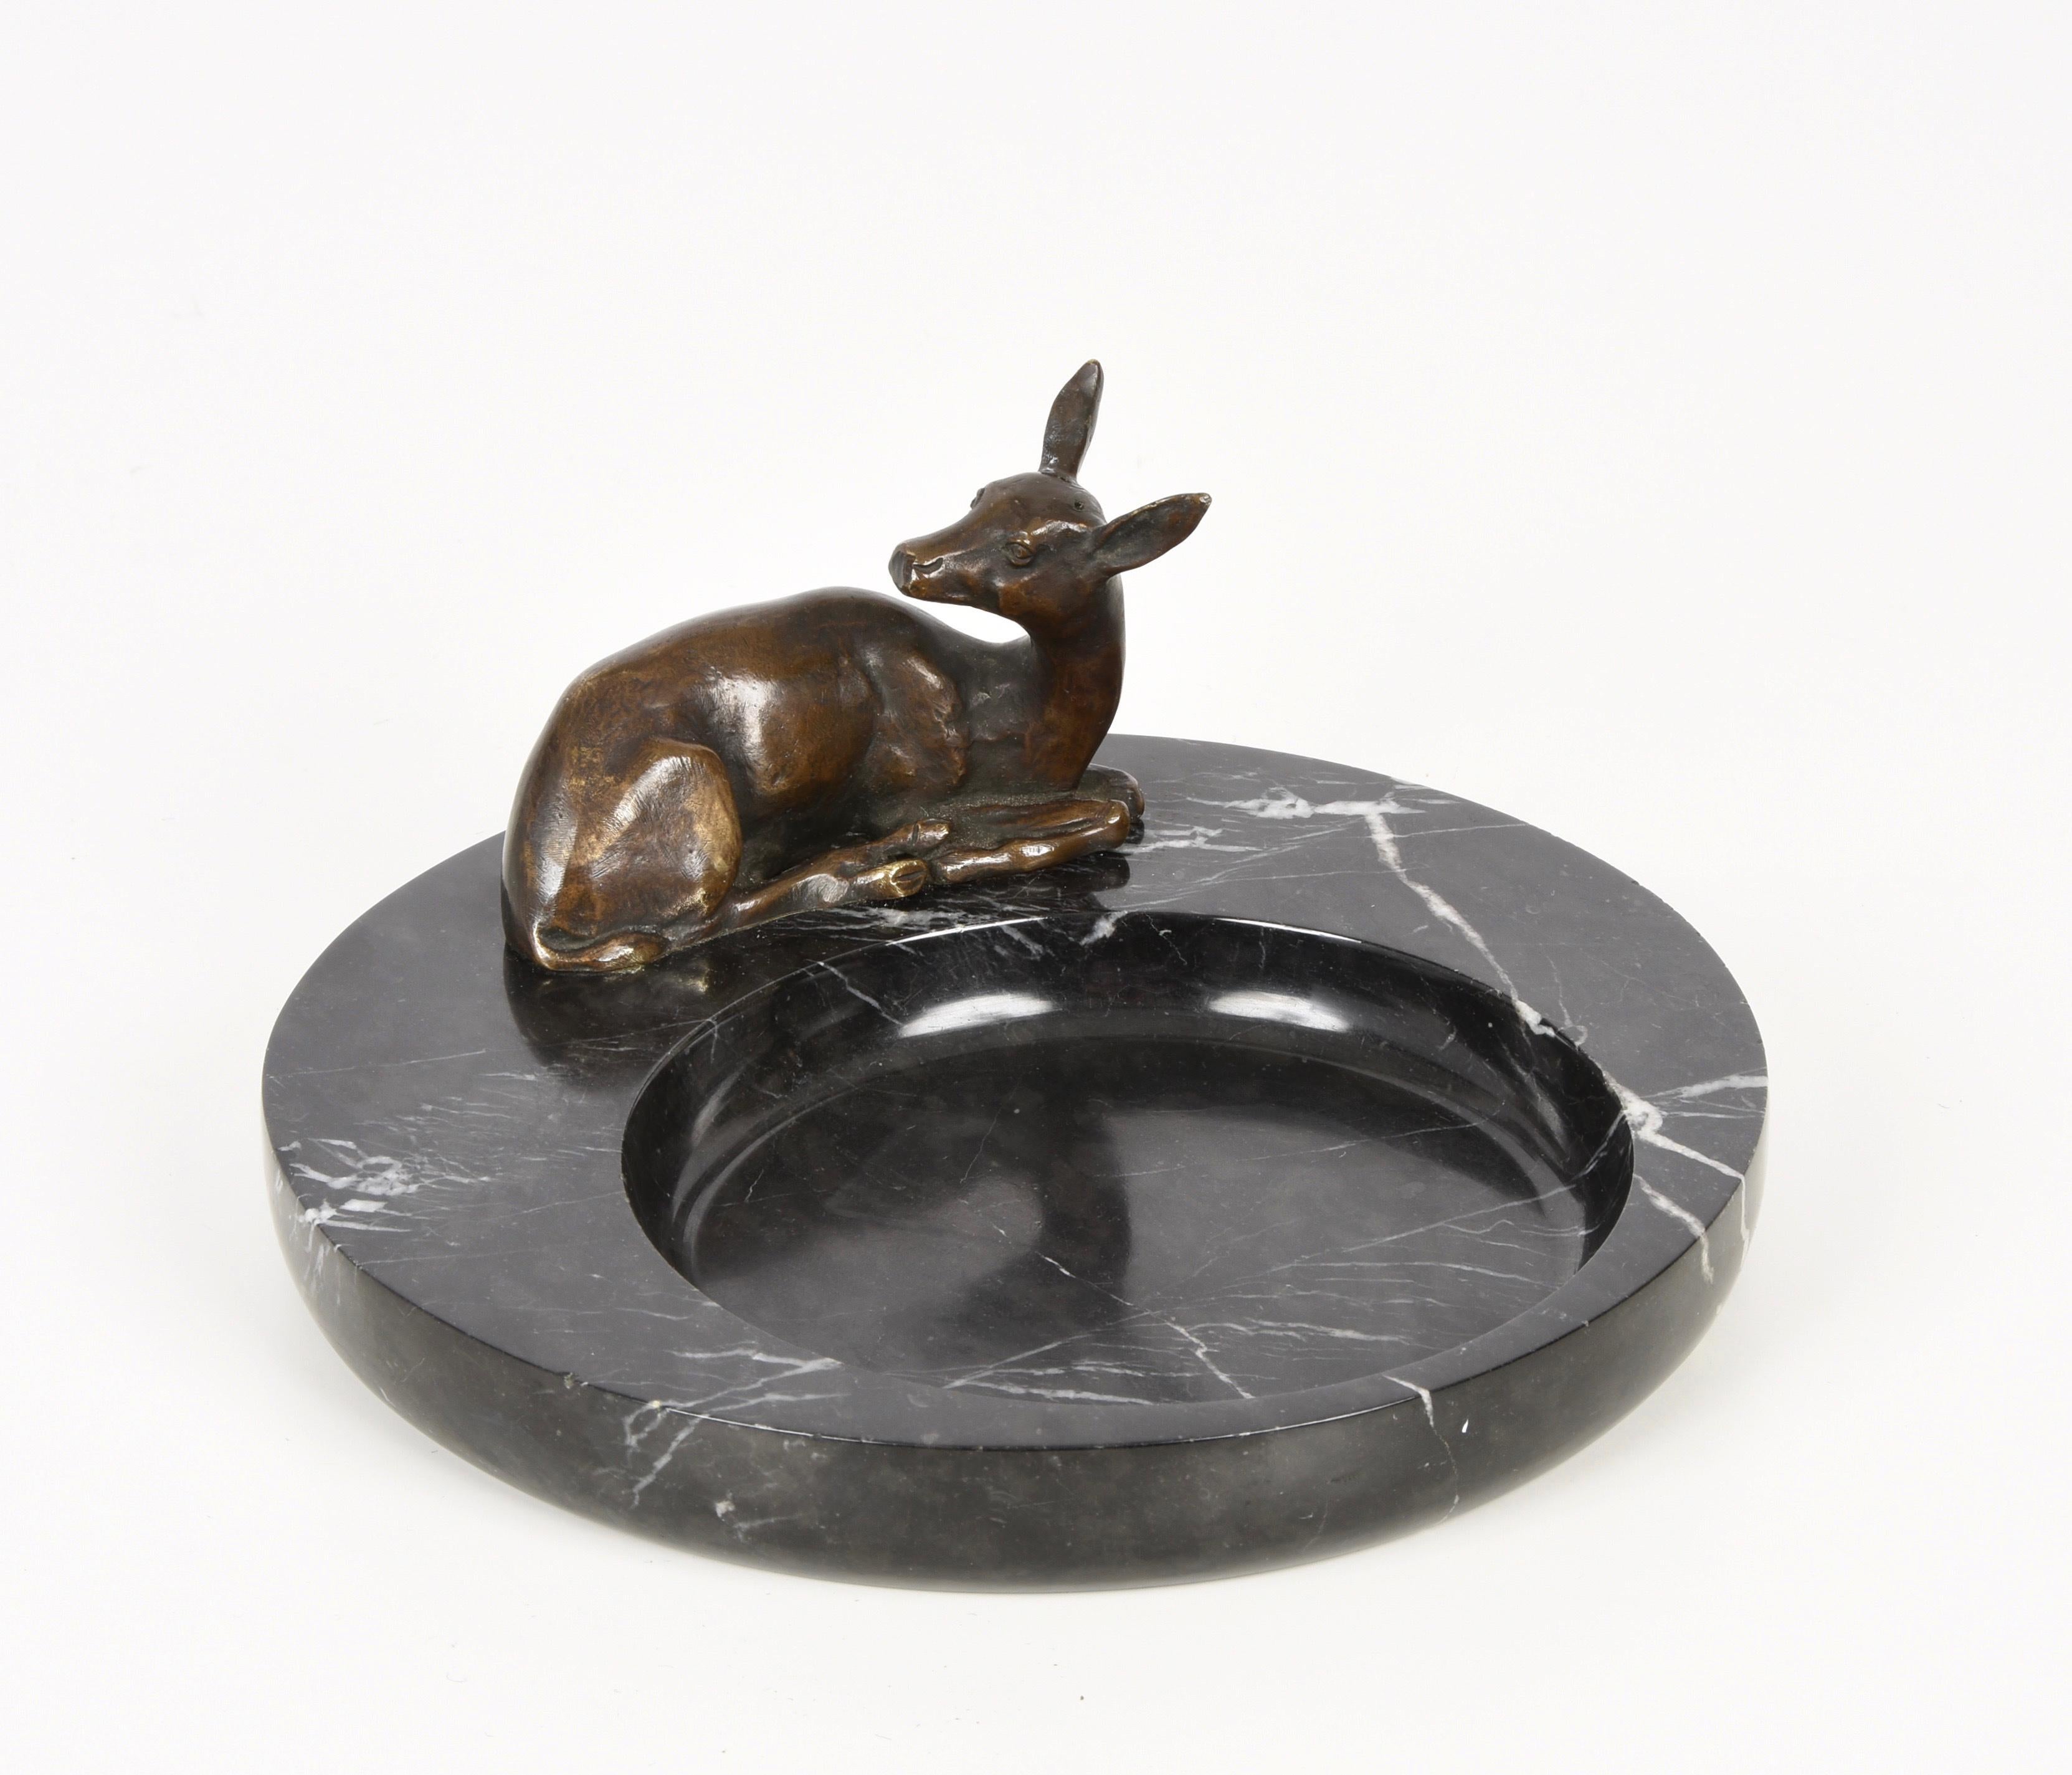 Amazing midcentury ashtray with black marble base with a fantastic bronze deer. This wonderful item was made in Italy during the 1930s.

A relaxed deer figure is laying on a large round black marble base. The whole item conveys tranquillity and